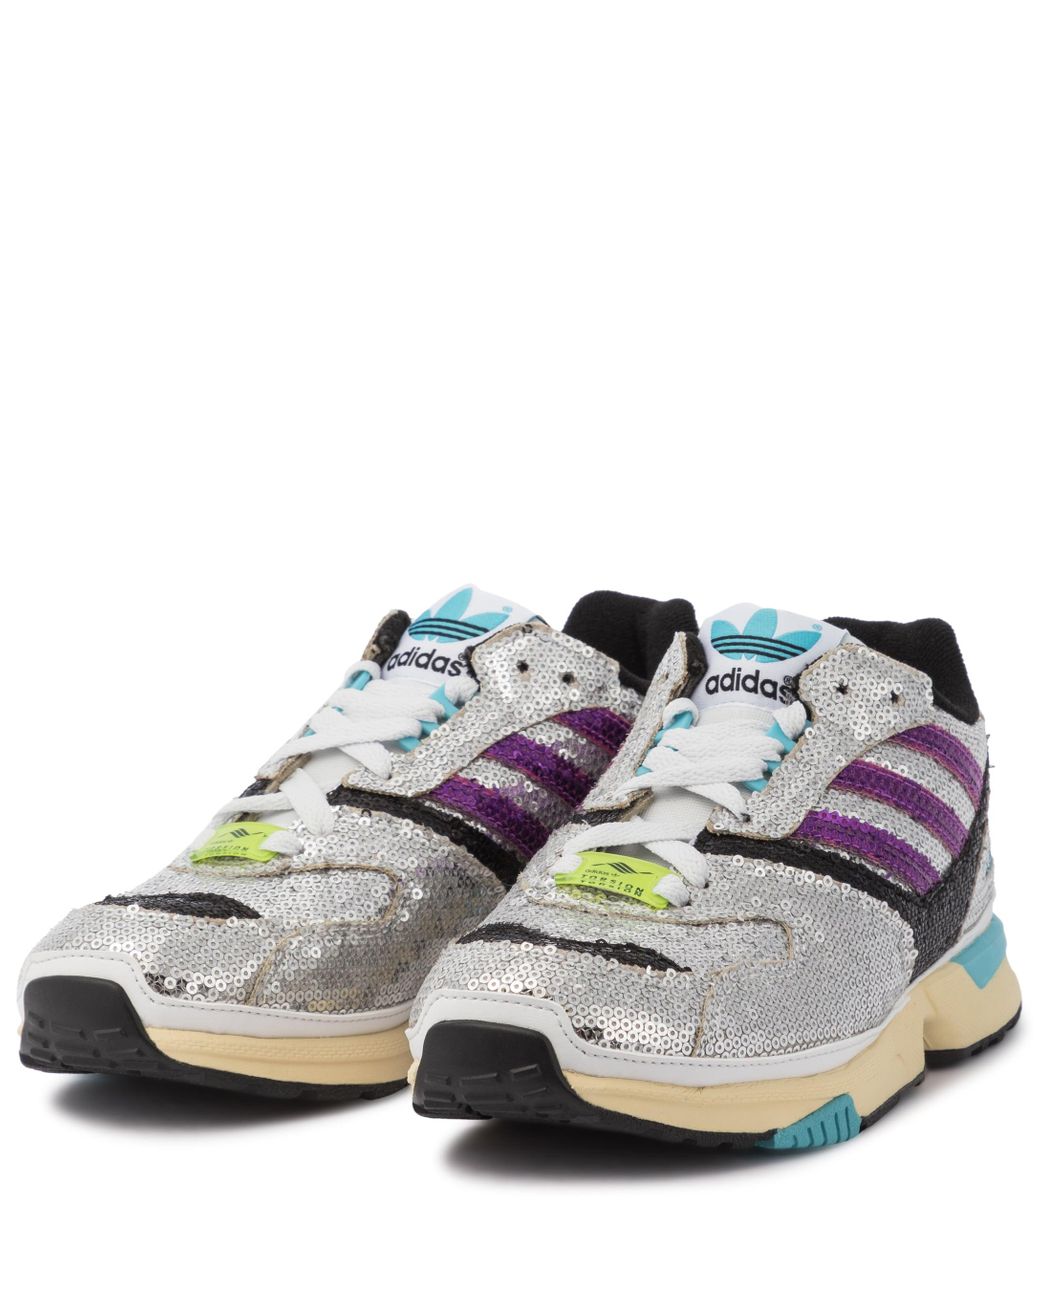 adidas Zx 4000 Sequined Sneakers in Silver (Metallic) | Lyst Australia